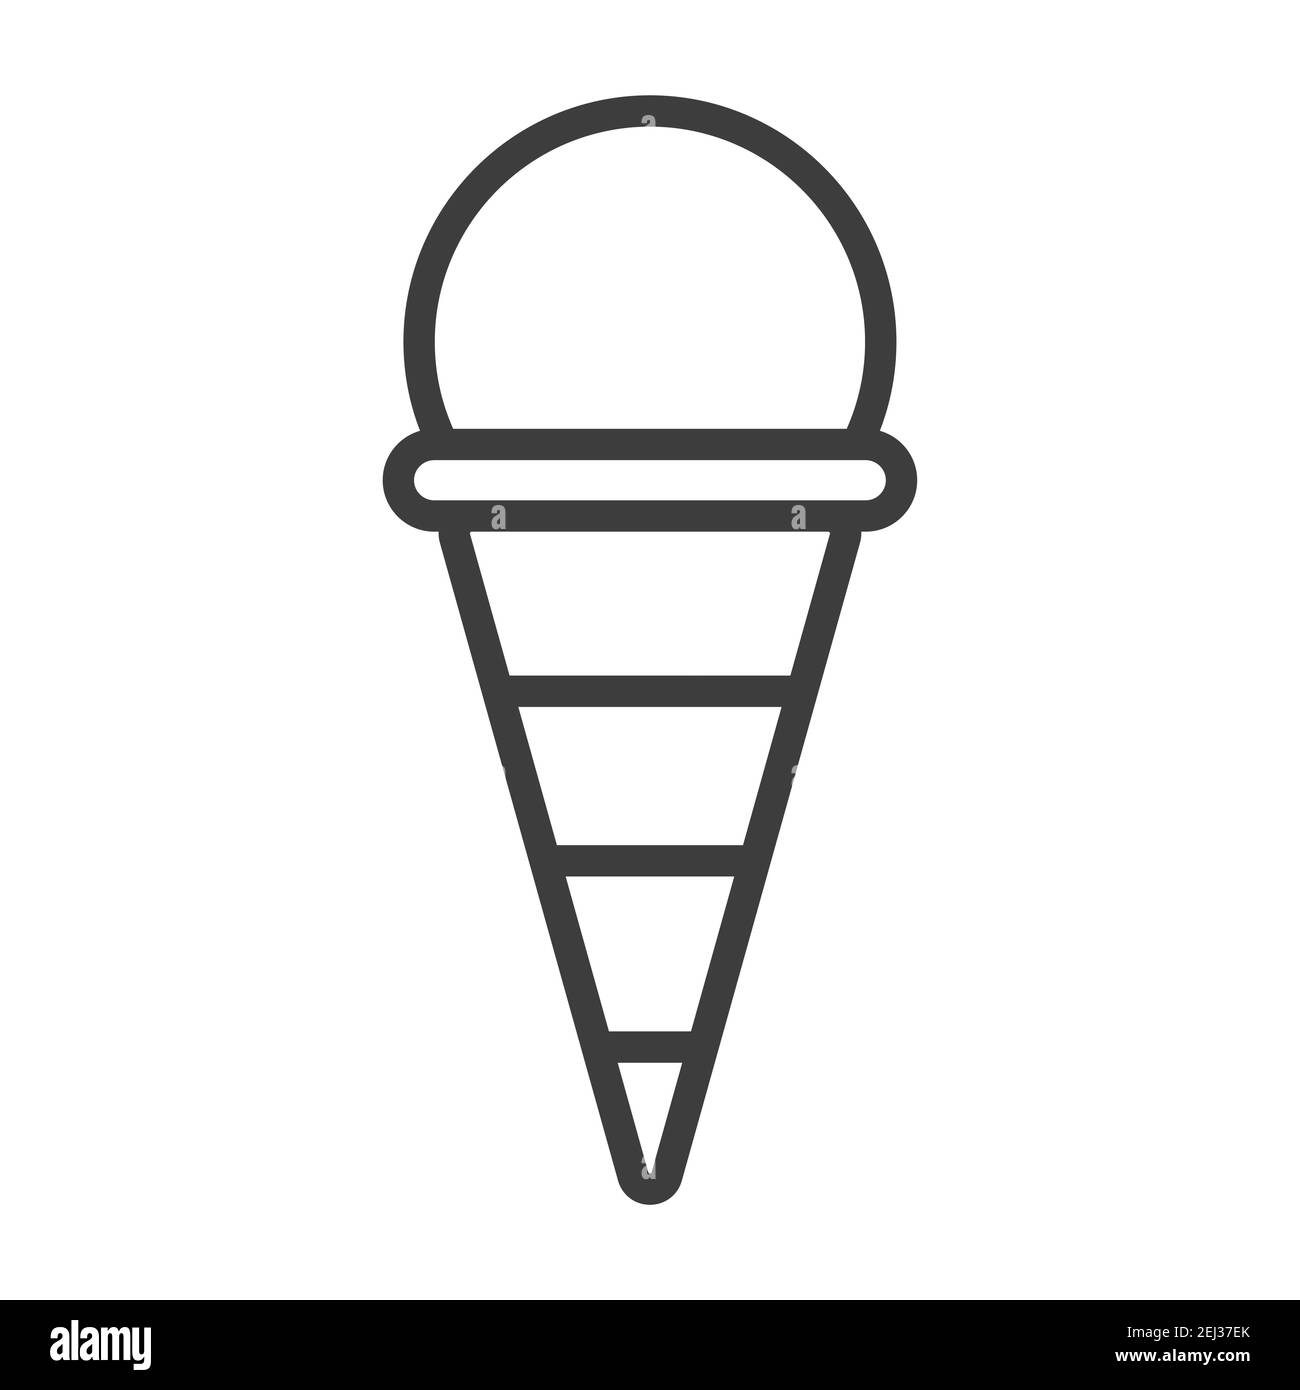 Delicious cold ice cream in an edible waffle glass. Simple food icon in trendy line style isolated on white background for web apps and mobile concept Stock Vector